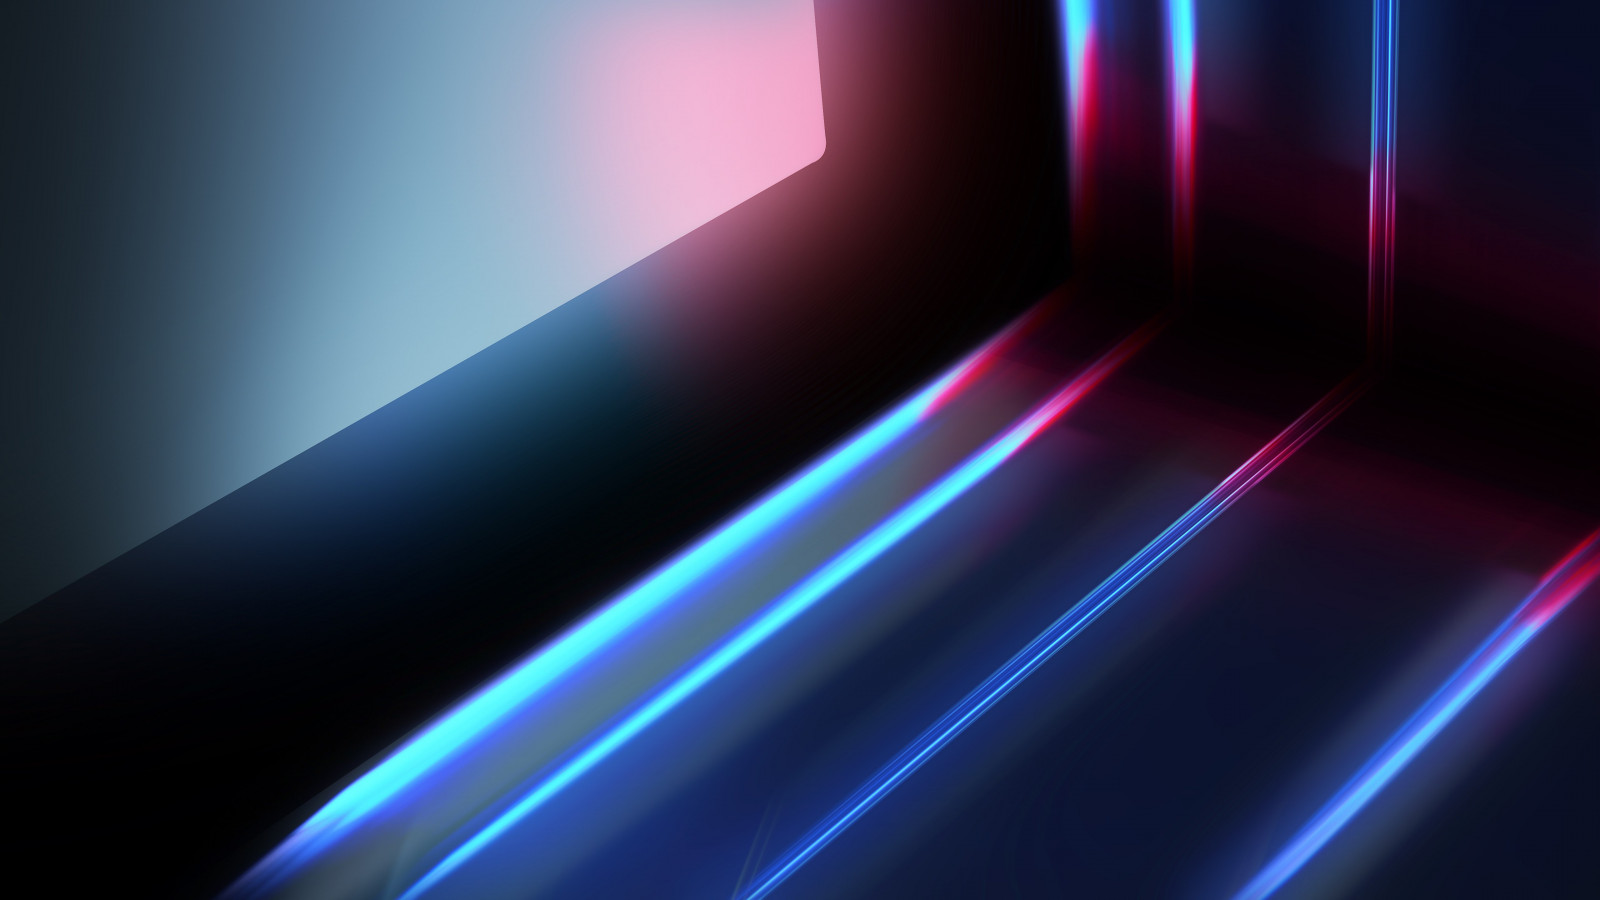 Abstract blue red lights wallpaper 1600x900